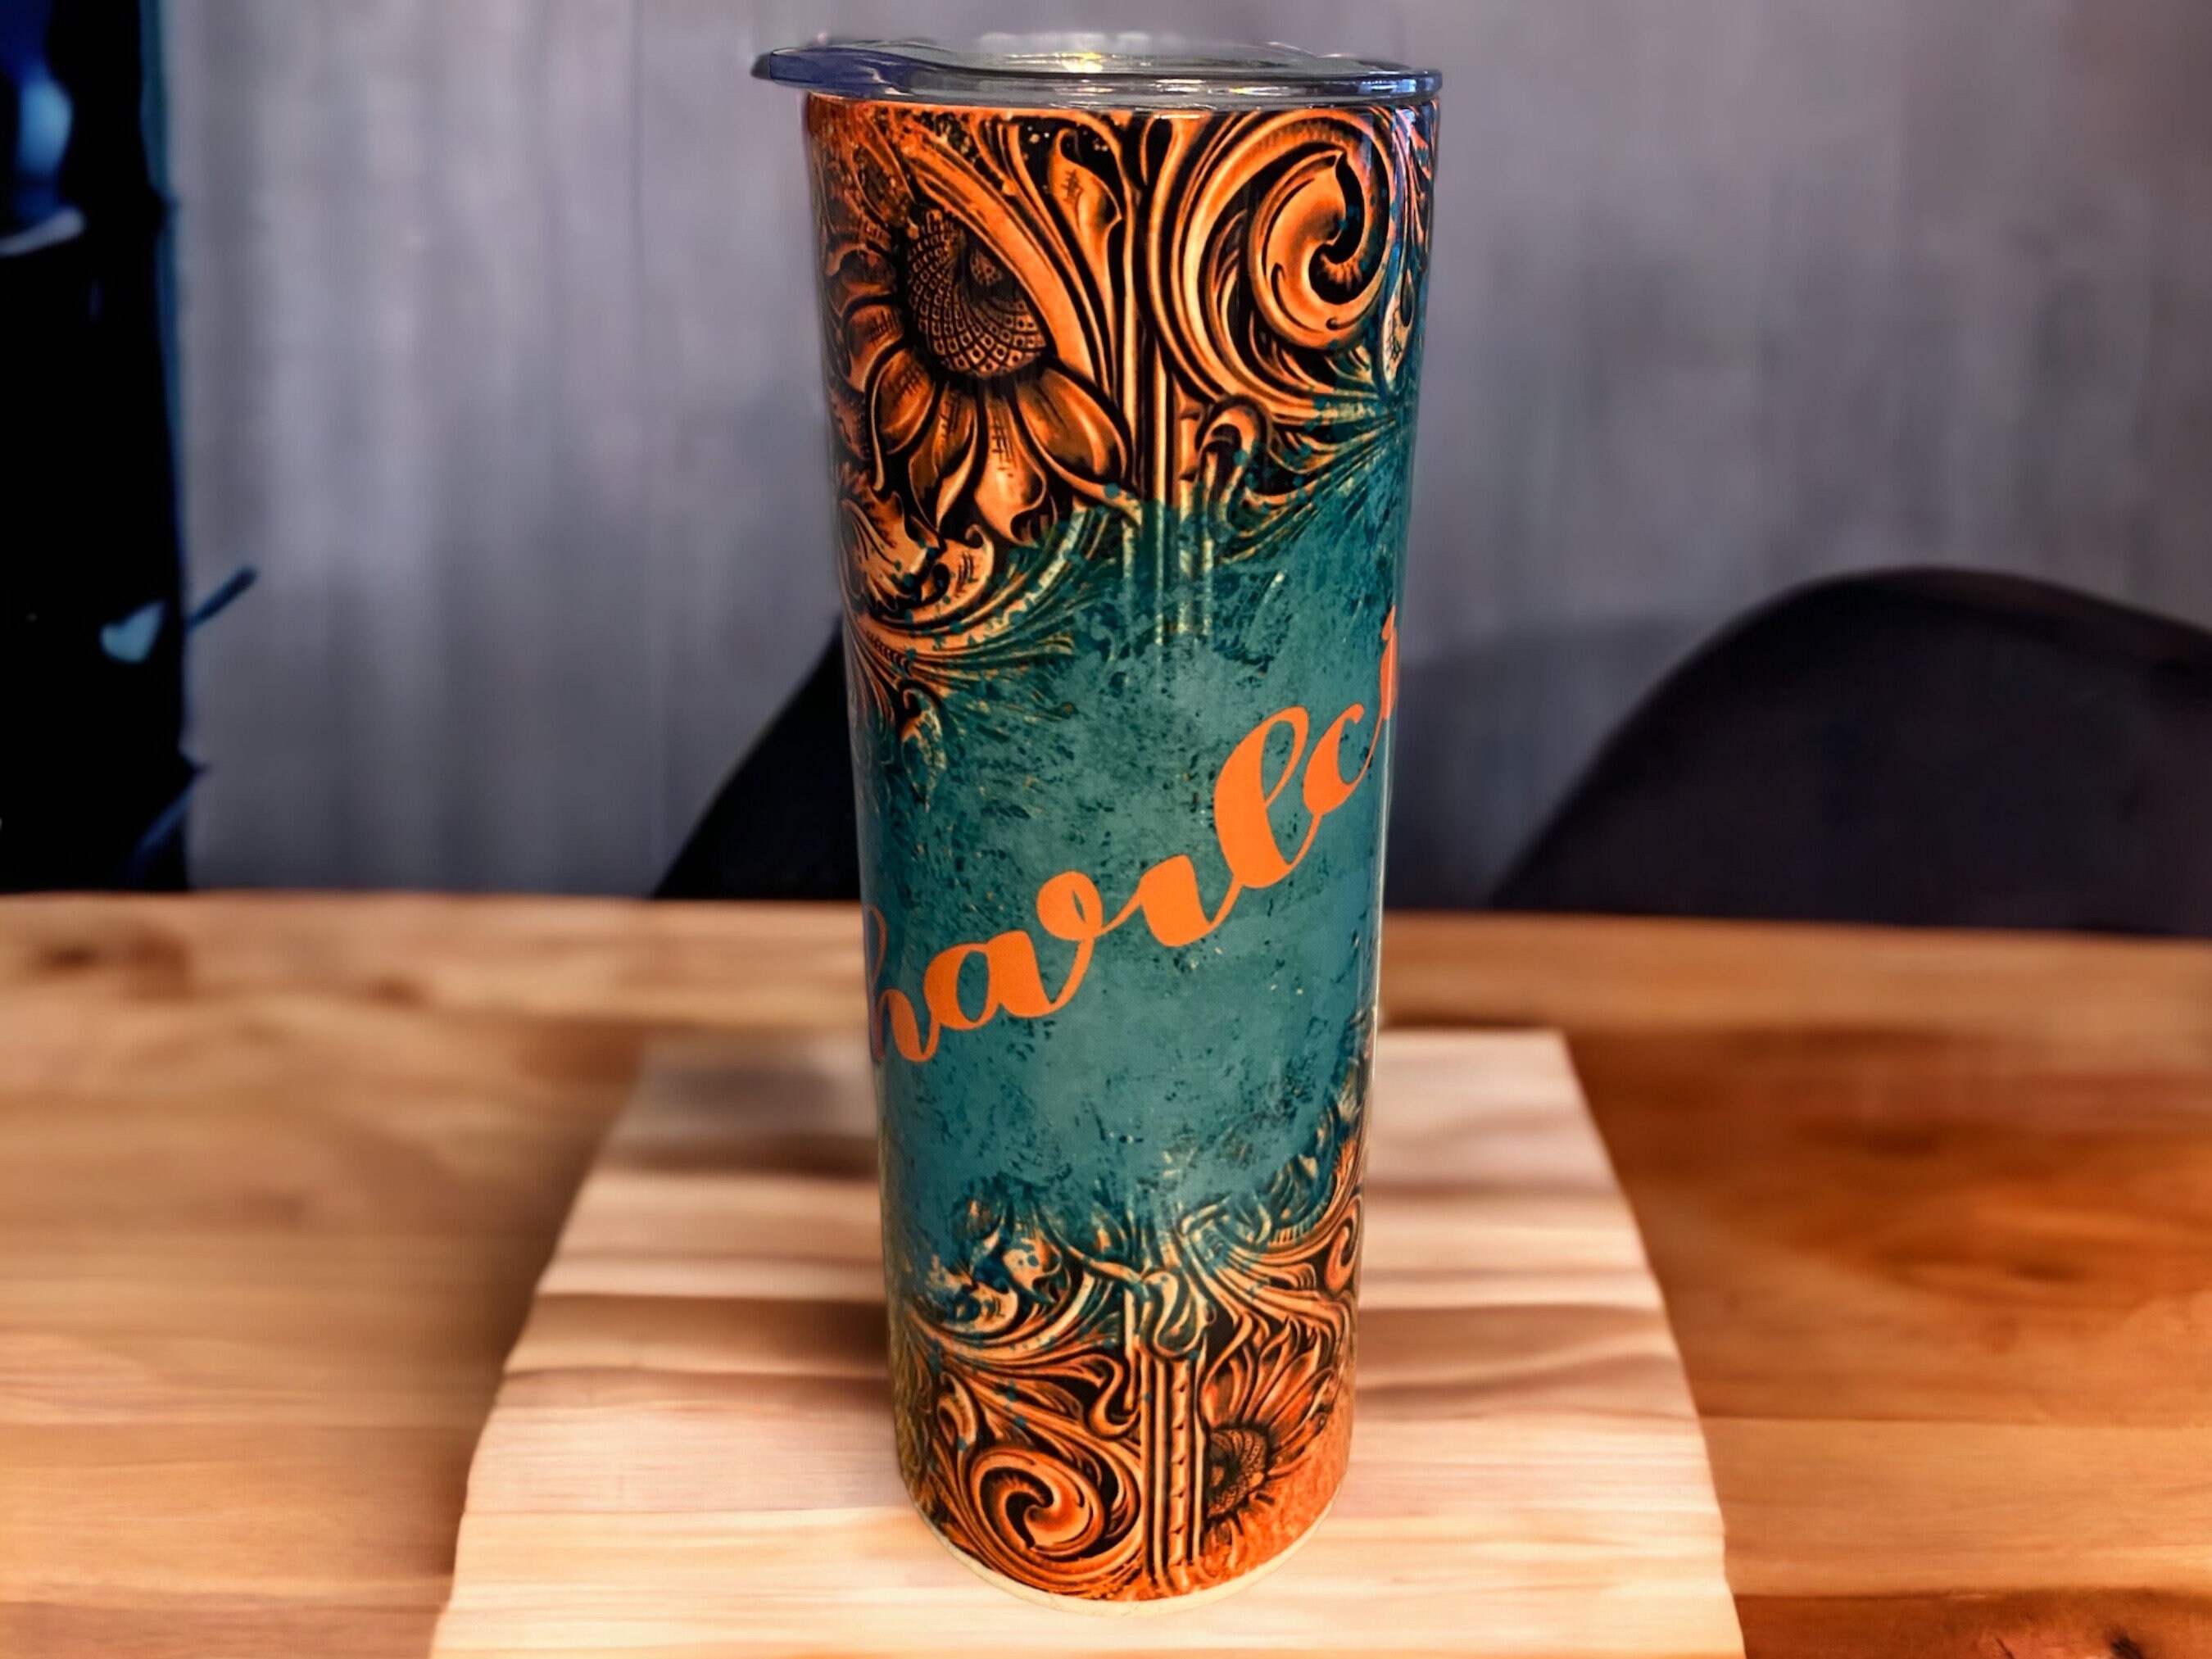 Western Tooled Leather Design with Sunflowers and Paisley Motif, Stanley  Engraved Tumbler, Personalized, Free Boot with Purchase